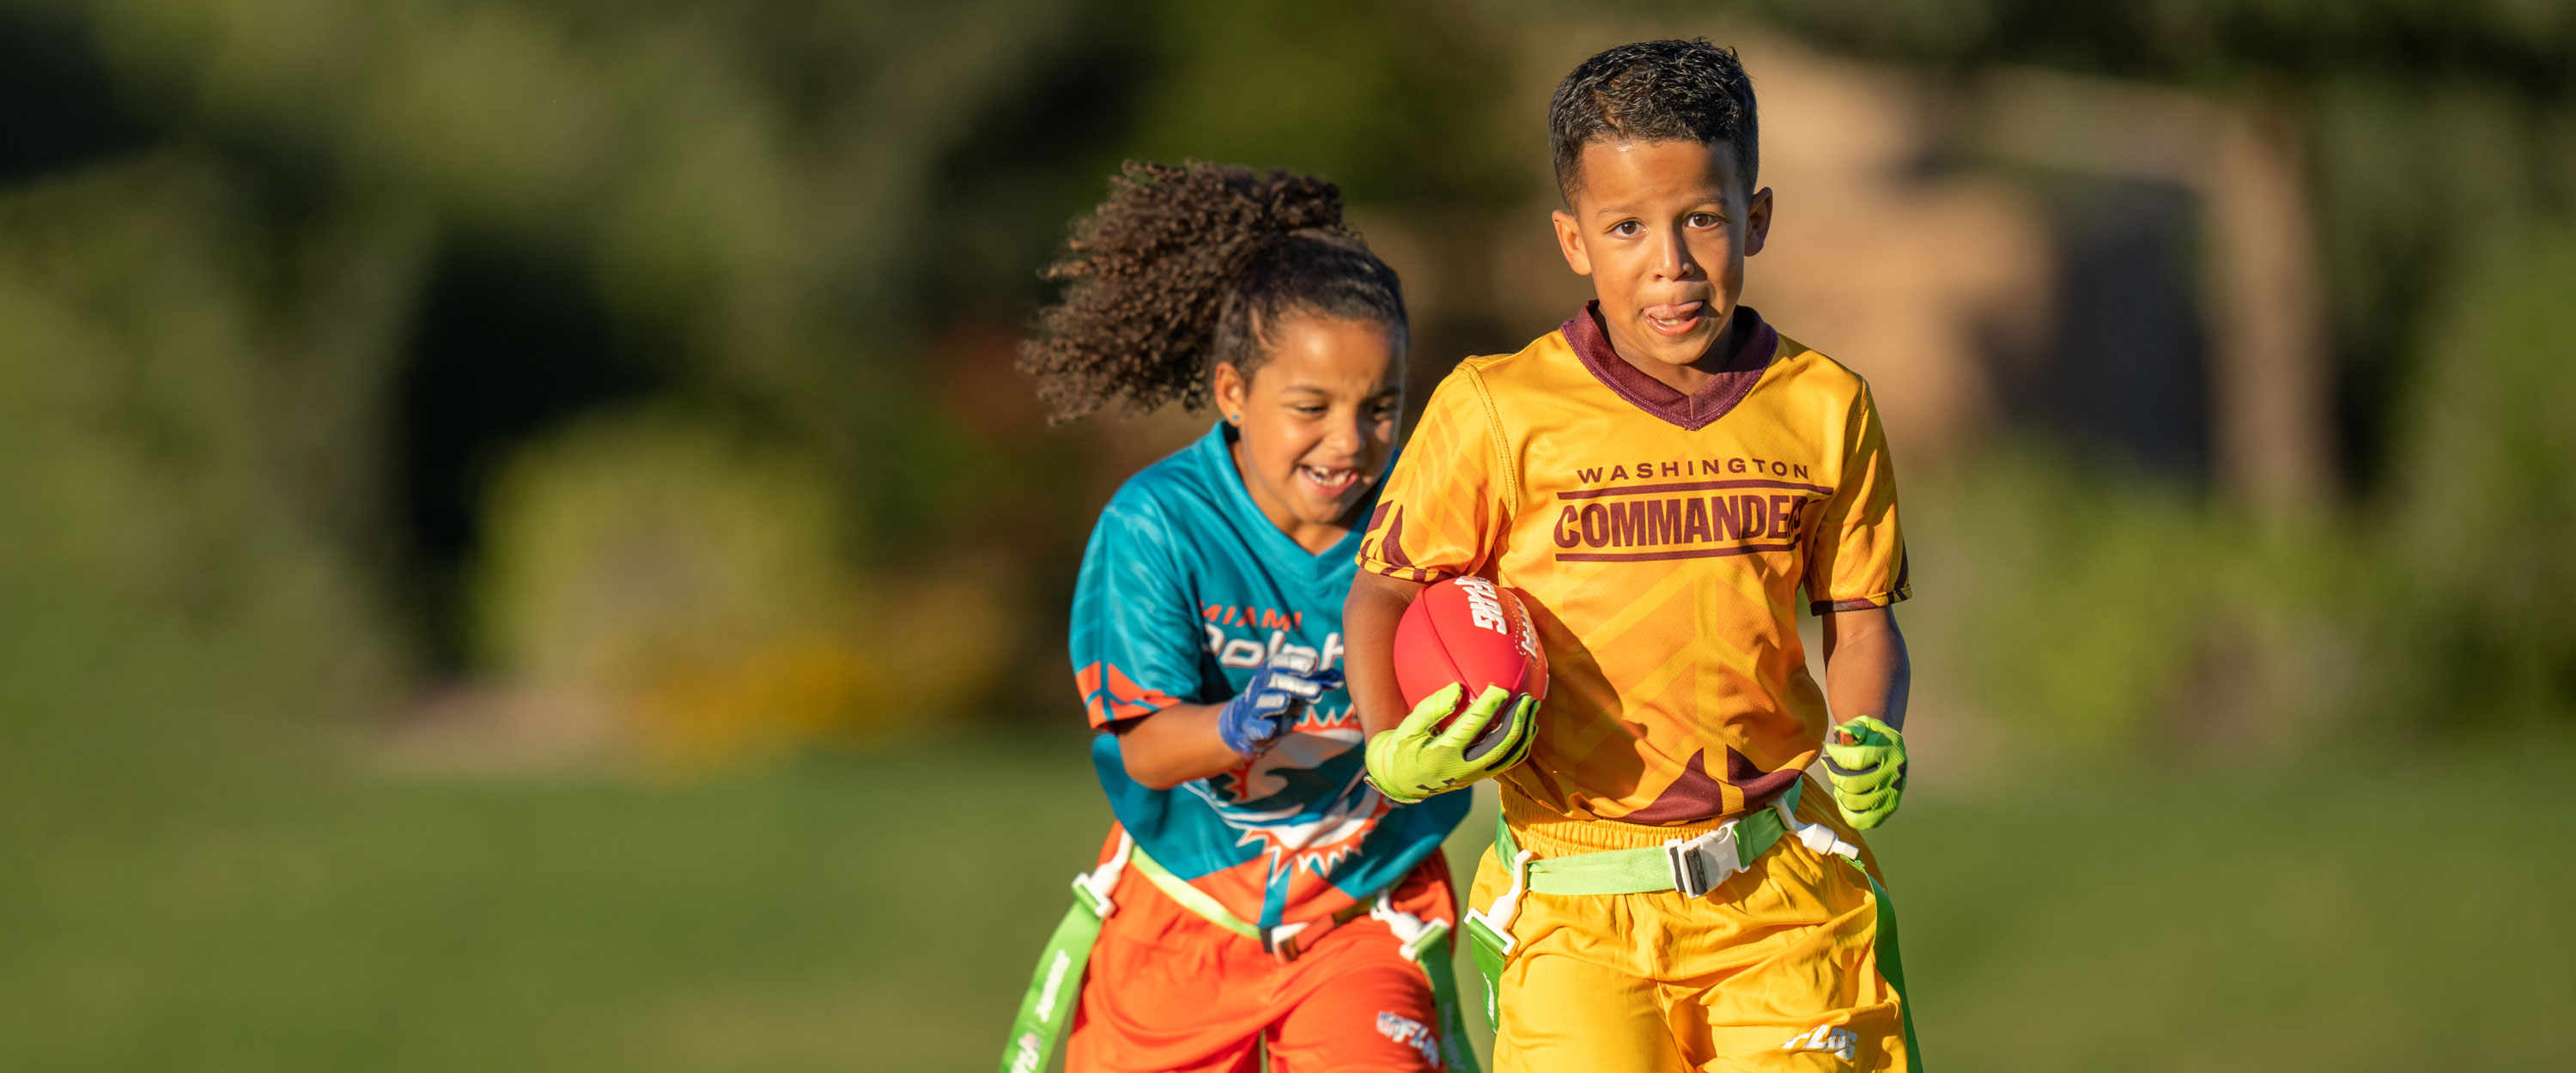 Play Like a Pro! Register for NFL Flag Football Today!